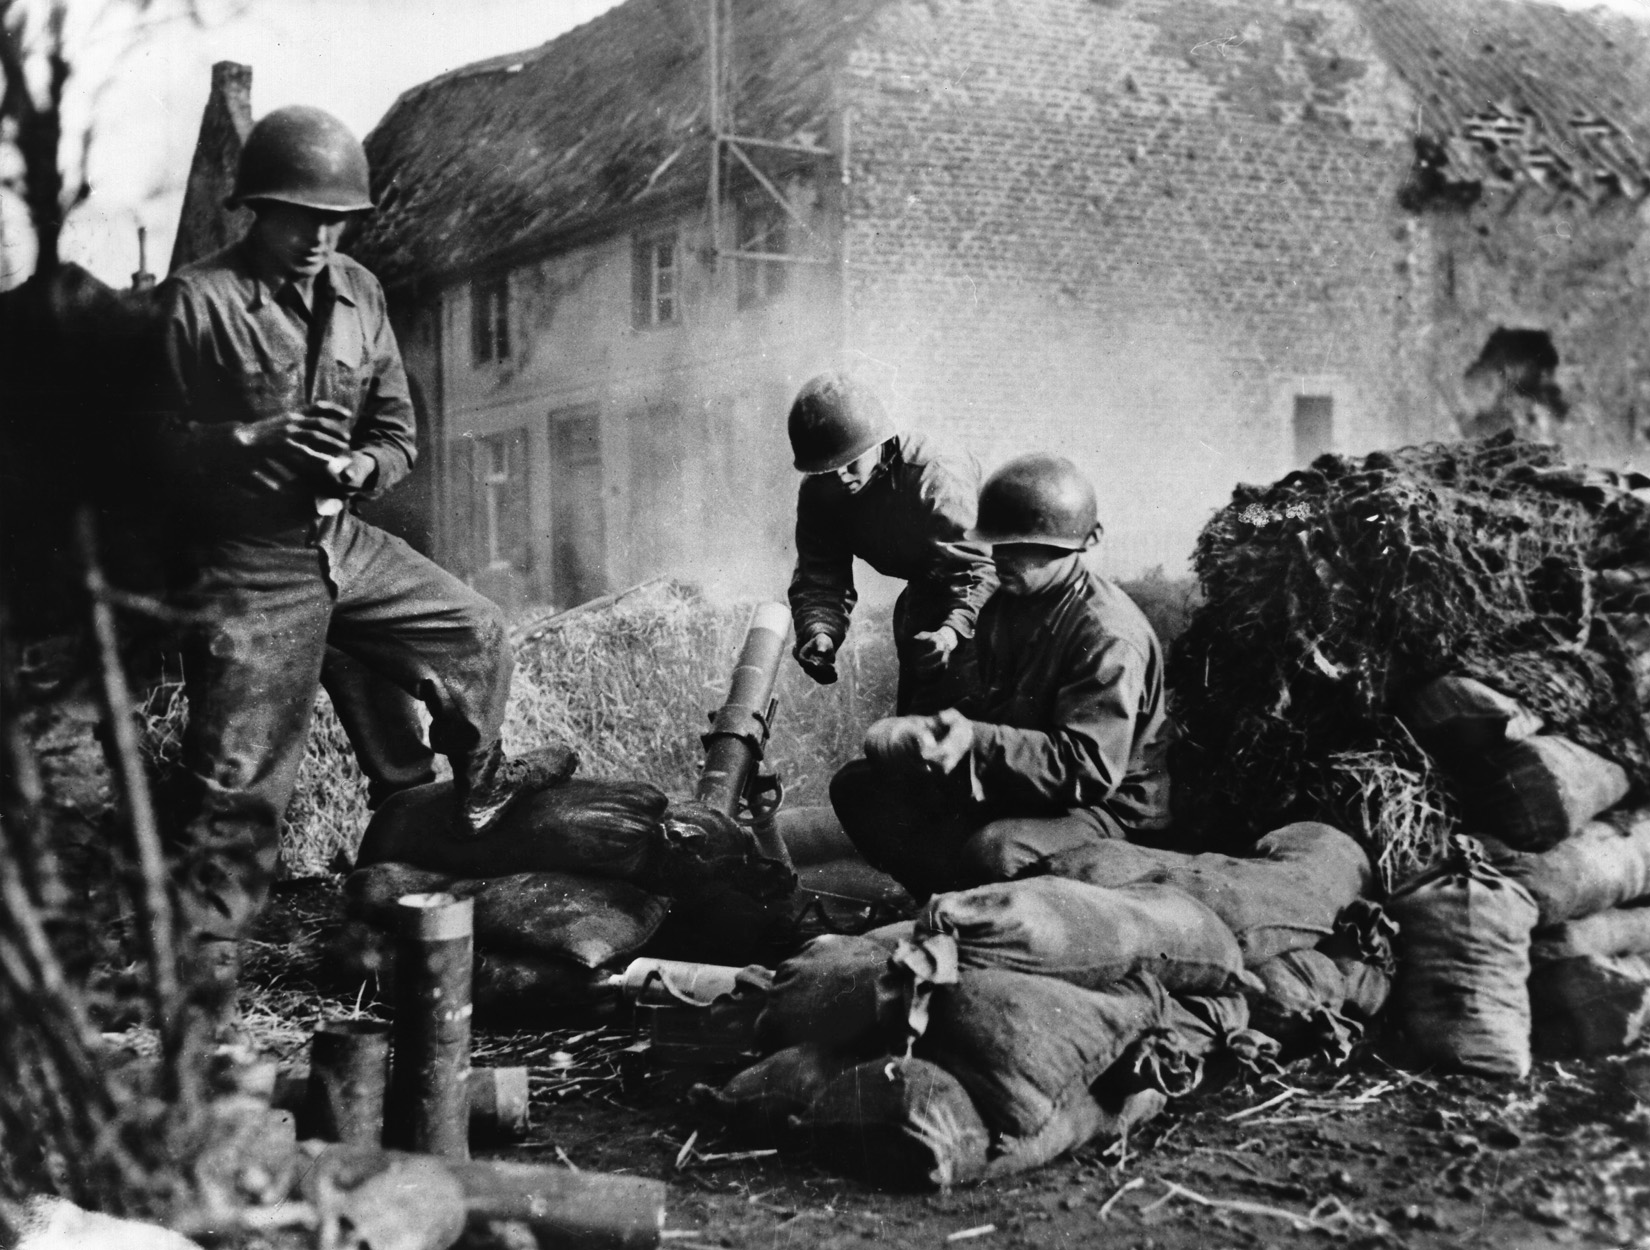 An American mortar team in action. Both sides employed mortars not only at street level, but also on the rooftops of buildings where spotters could track enemy movement.